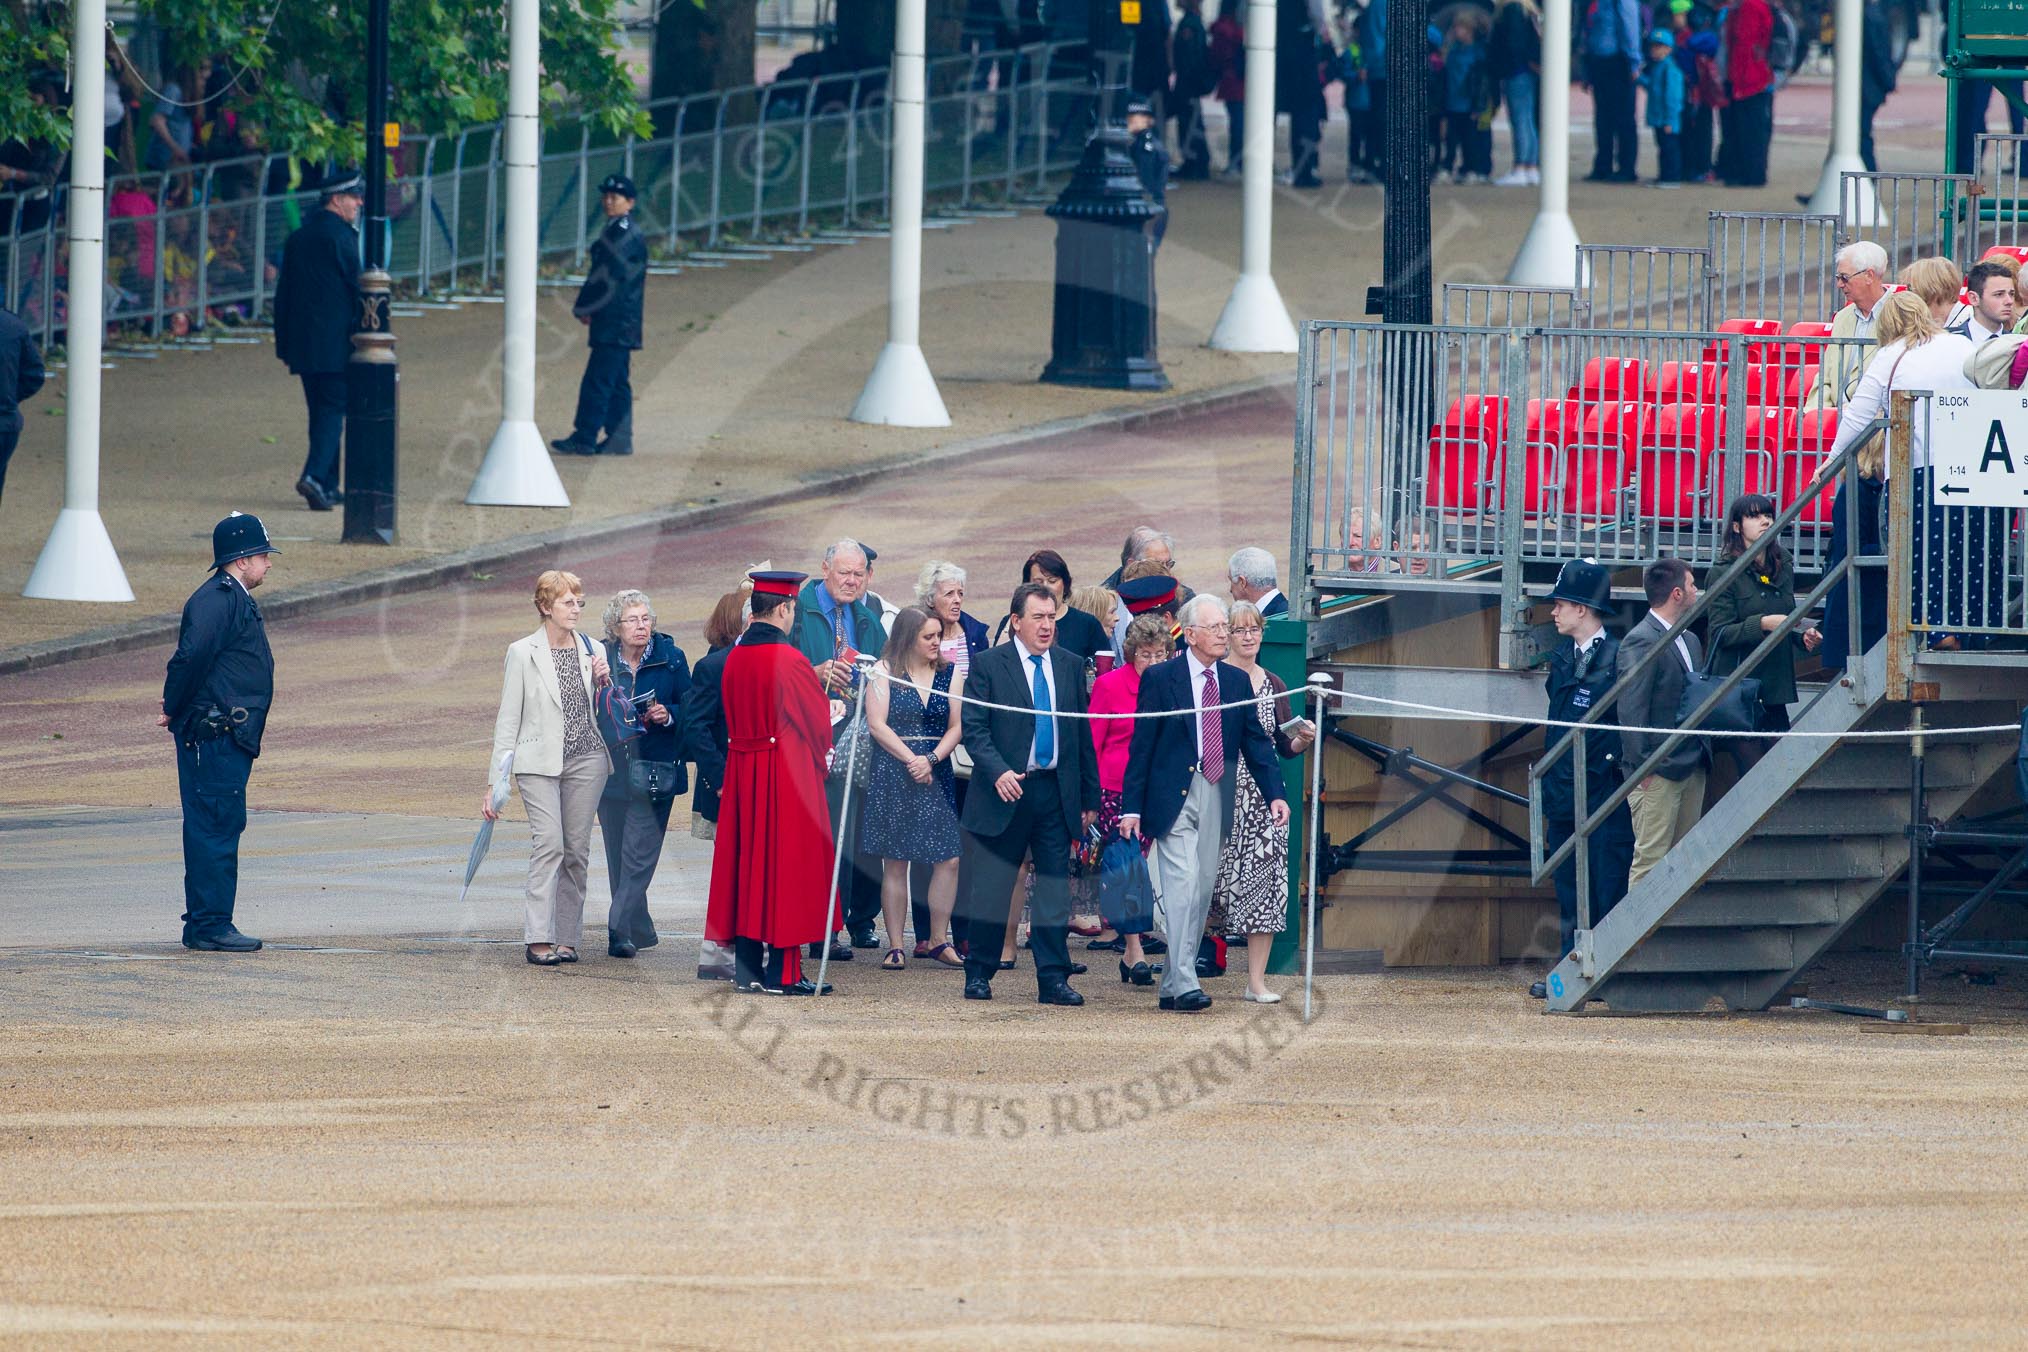 The Colonel's Review 2014.
Horse Guards Parade, Westminster,
London,

United Kingdom,
on 07 June 2014 at 09:22, image #4